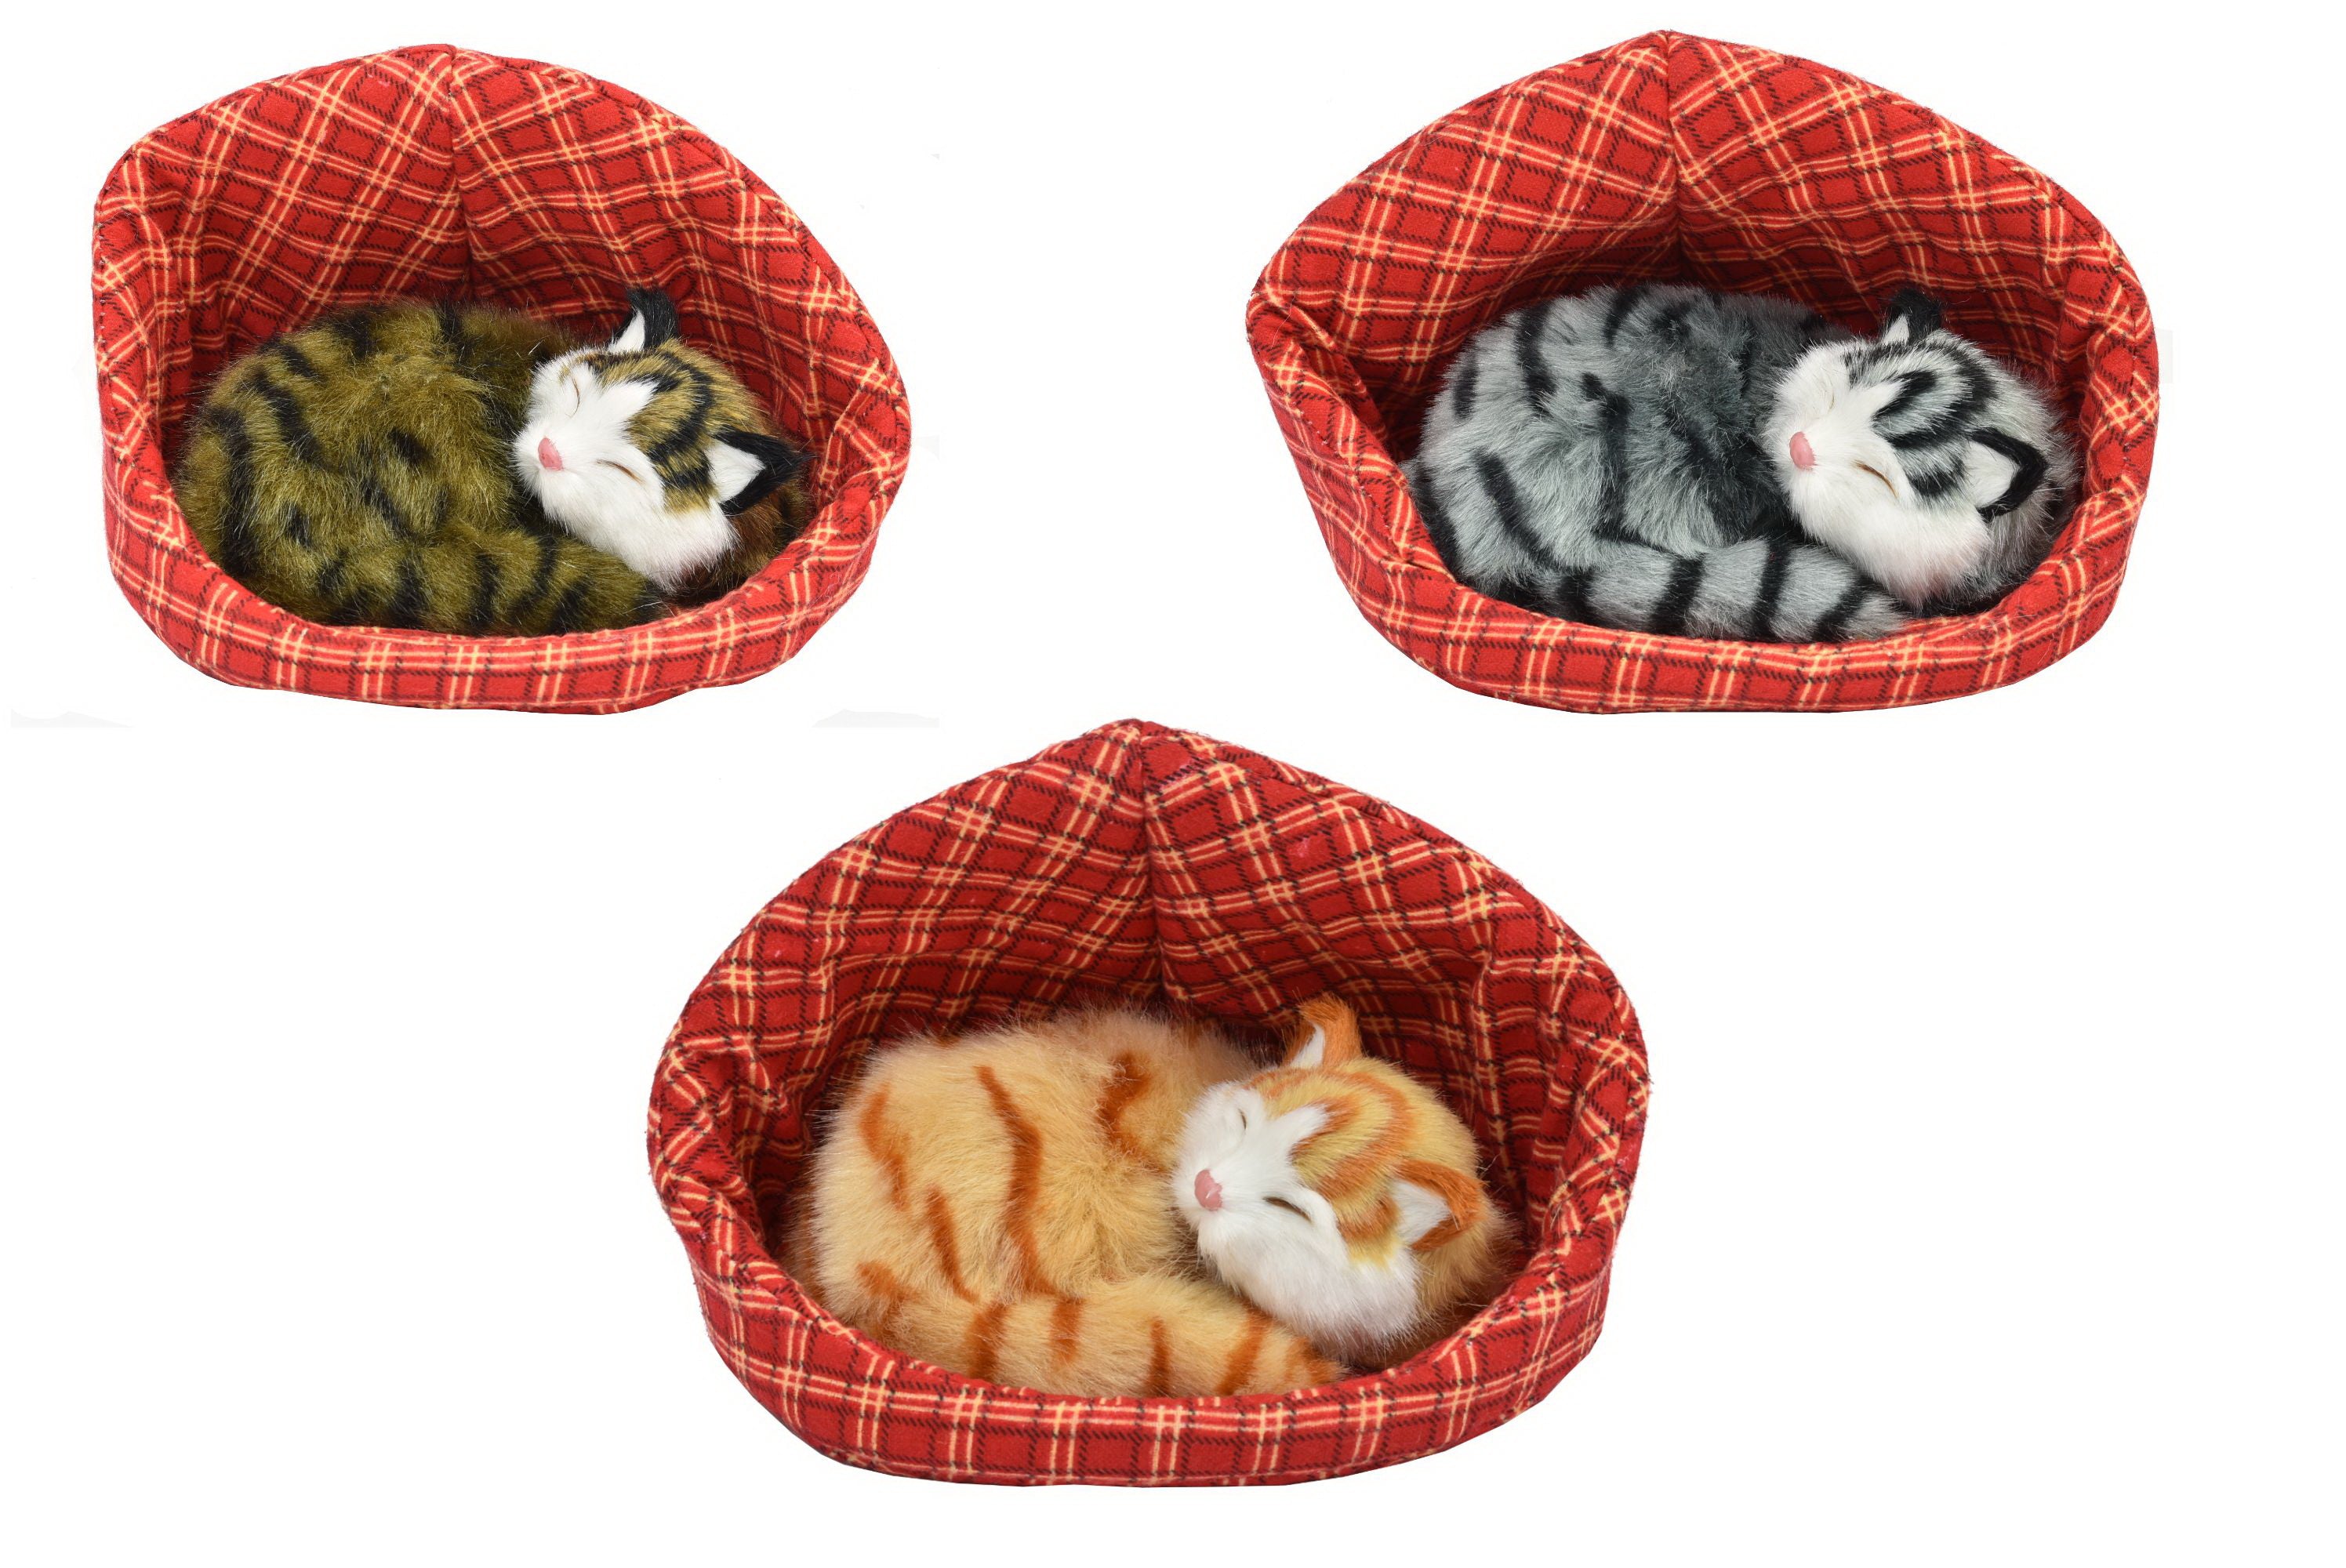 Kandytoys Cat In a Basket With Sound - 3 Designs